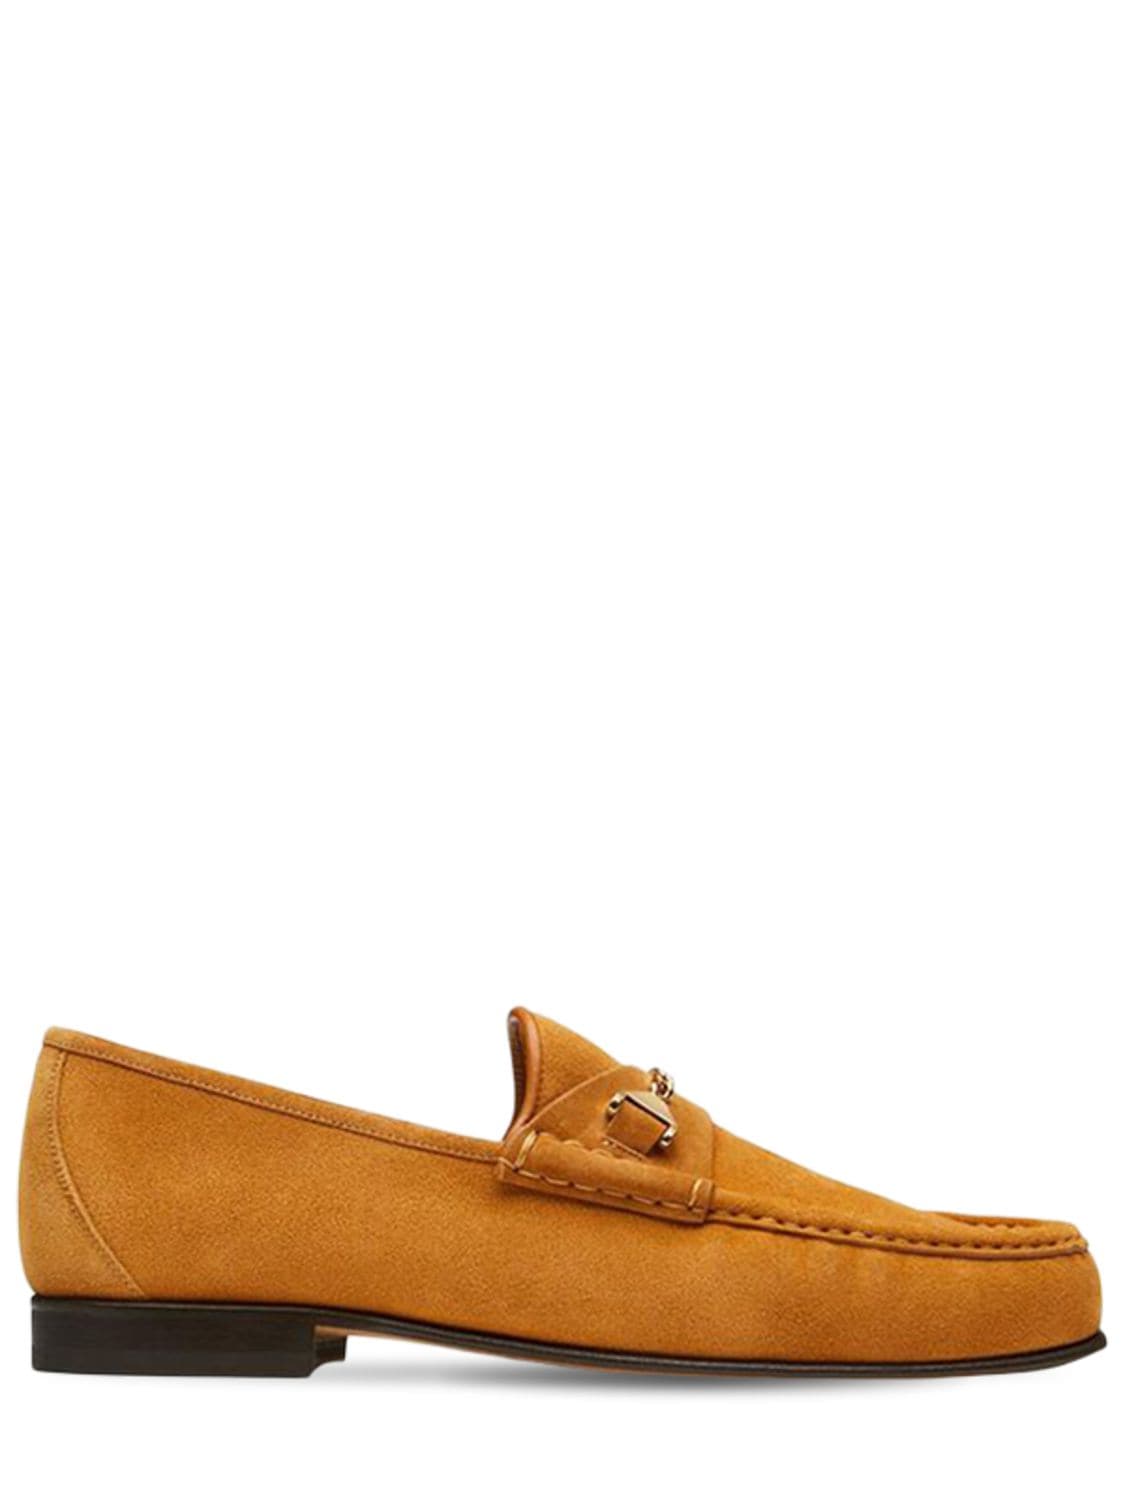 HYUSTO Mick Suede Loafers